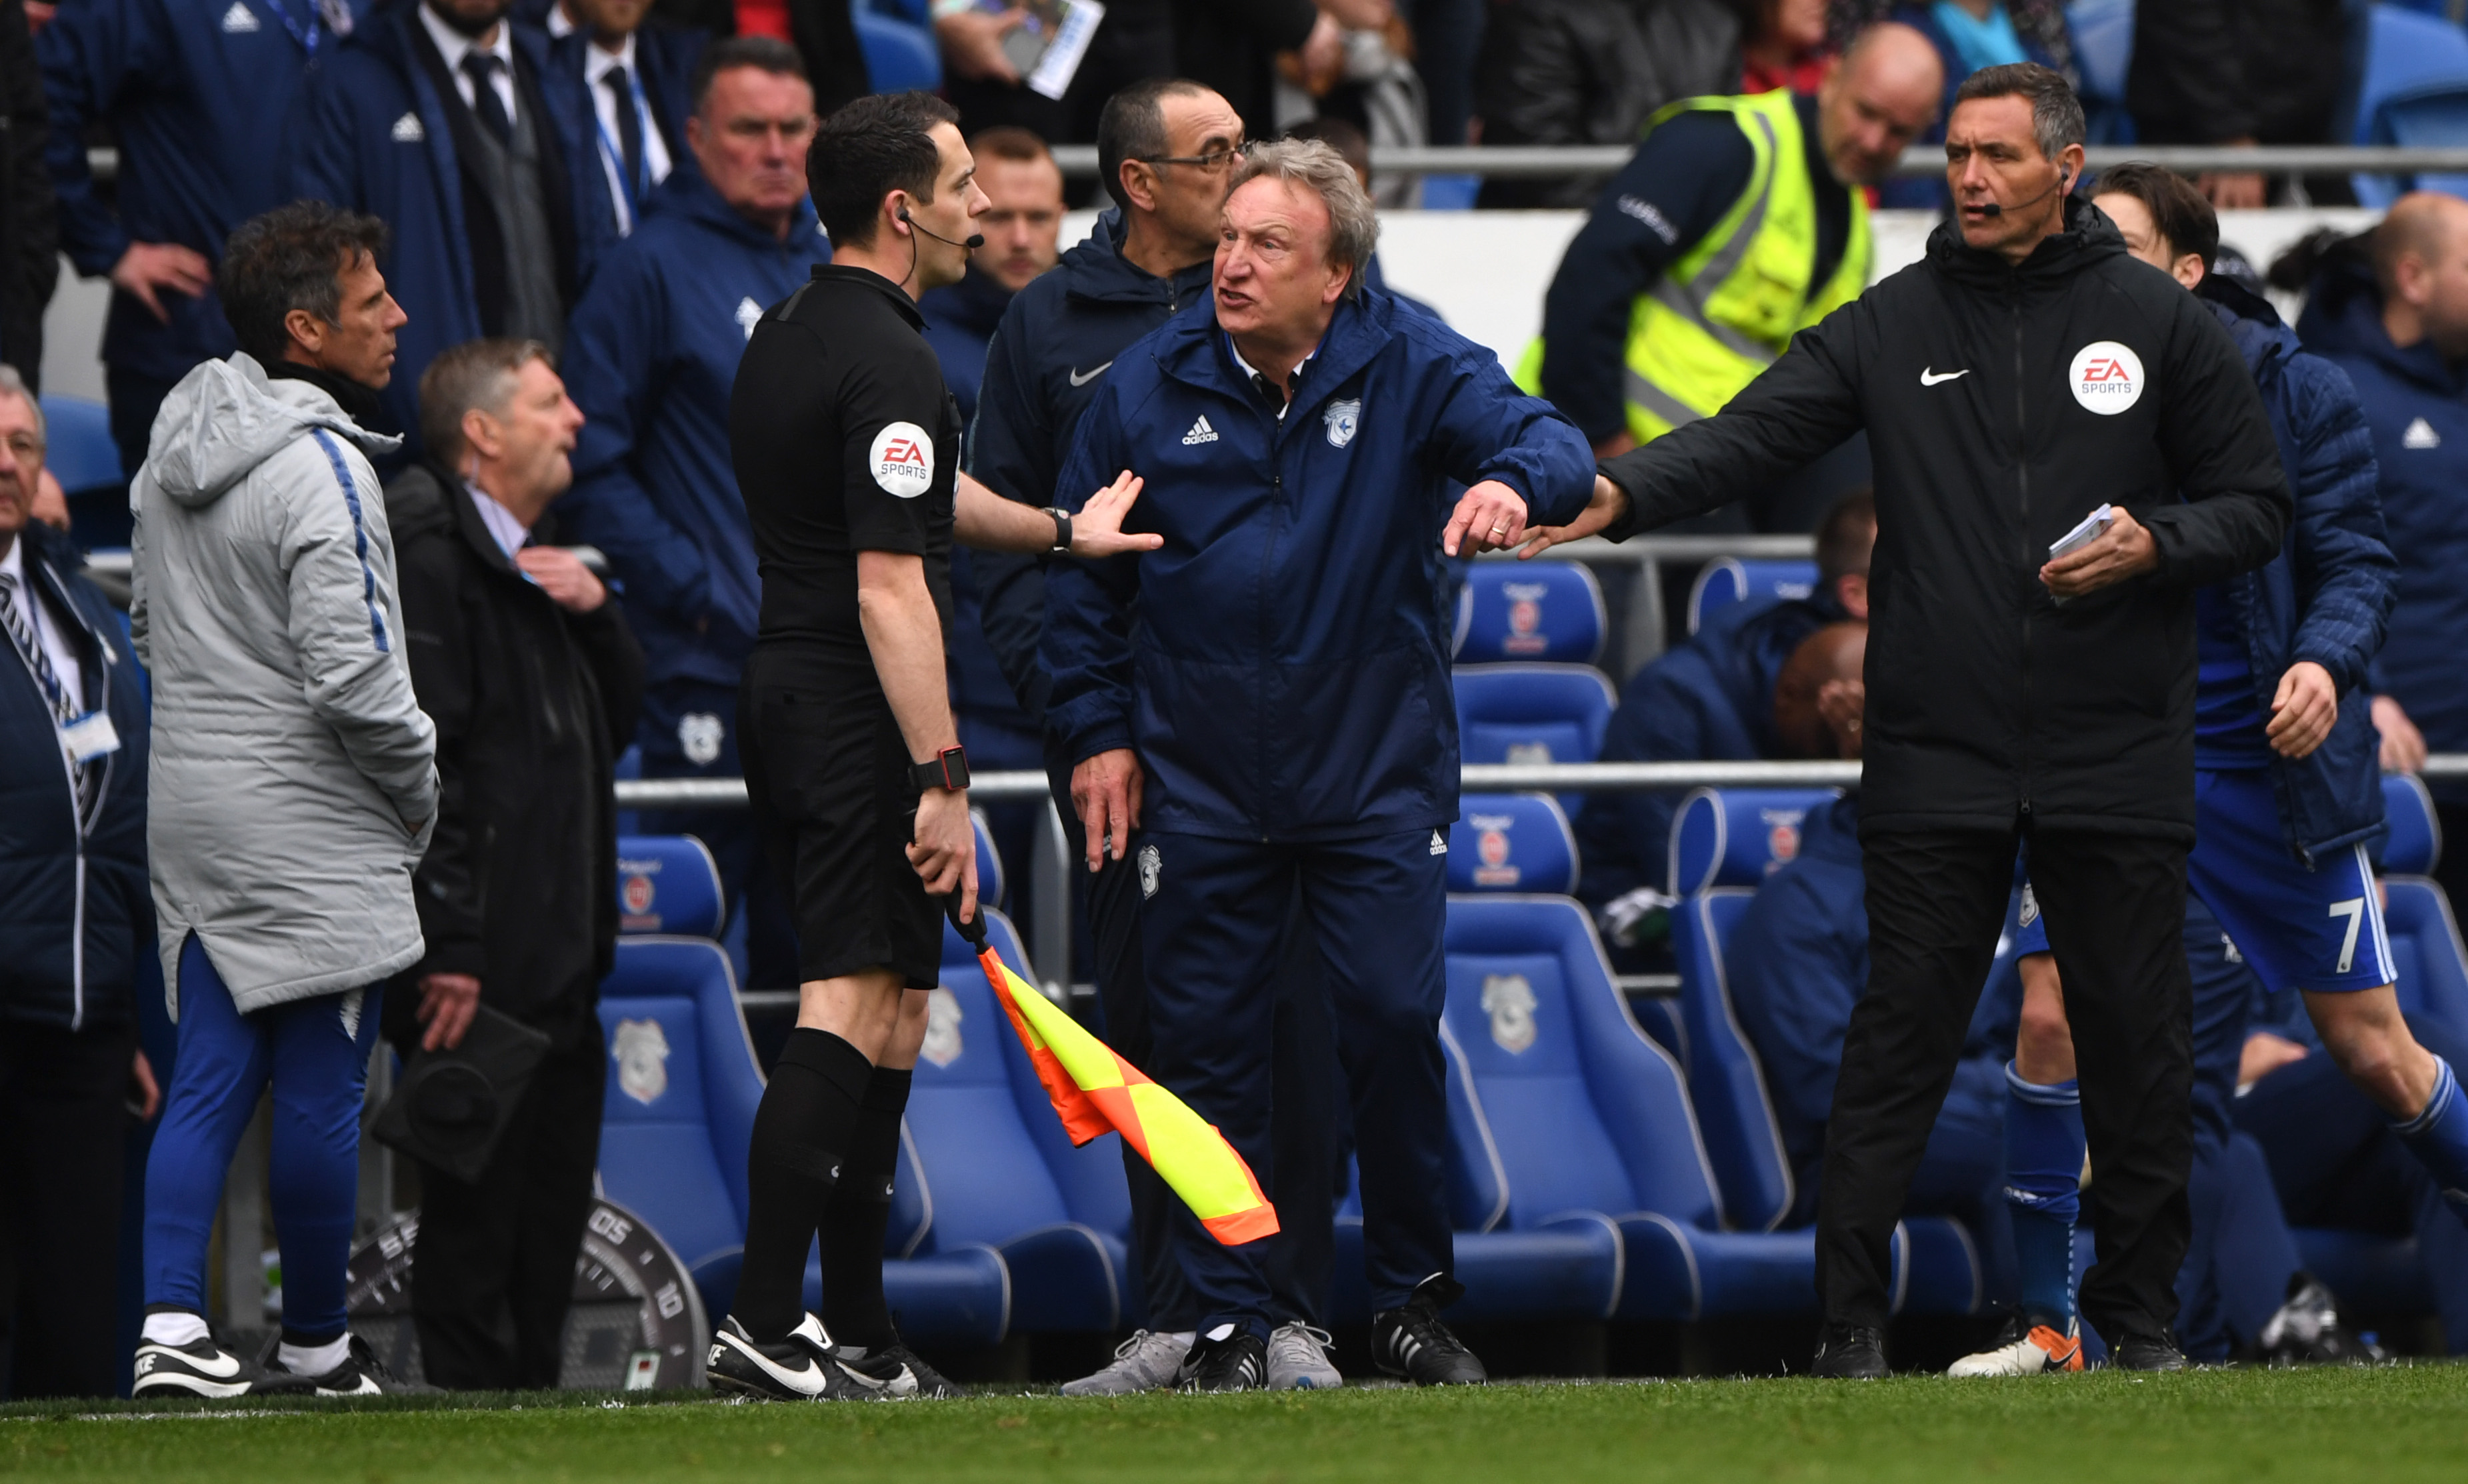 CARDIFF, WALES - MARCH 31: Cardiff manager Neil Warnock confronts the assistant referee during the Premier League match between Cardiff City and Chelsea FC at Cardiff City Stadium on March 31, 2019 in Cardiff, United Kingdom. (Photo by Stu Forster/Getty Images)